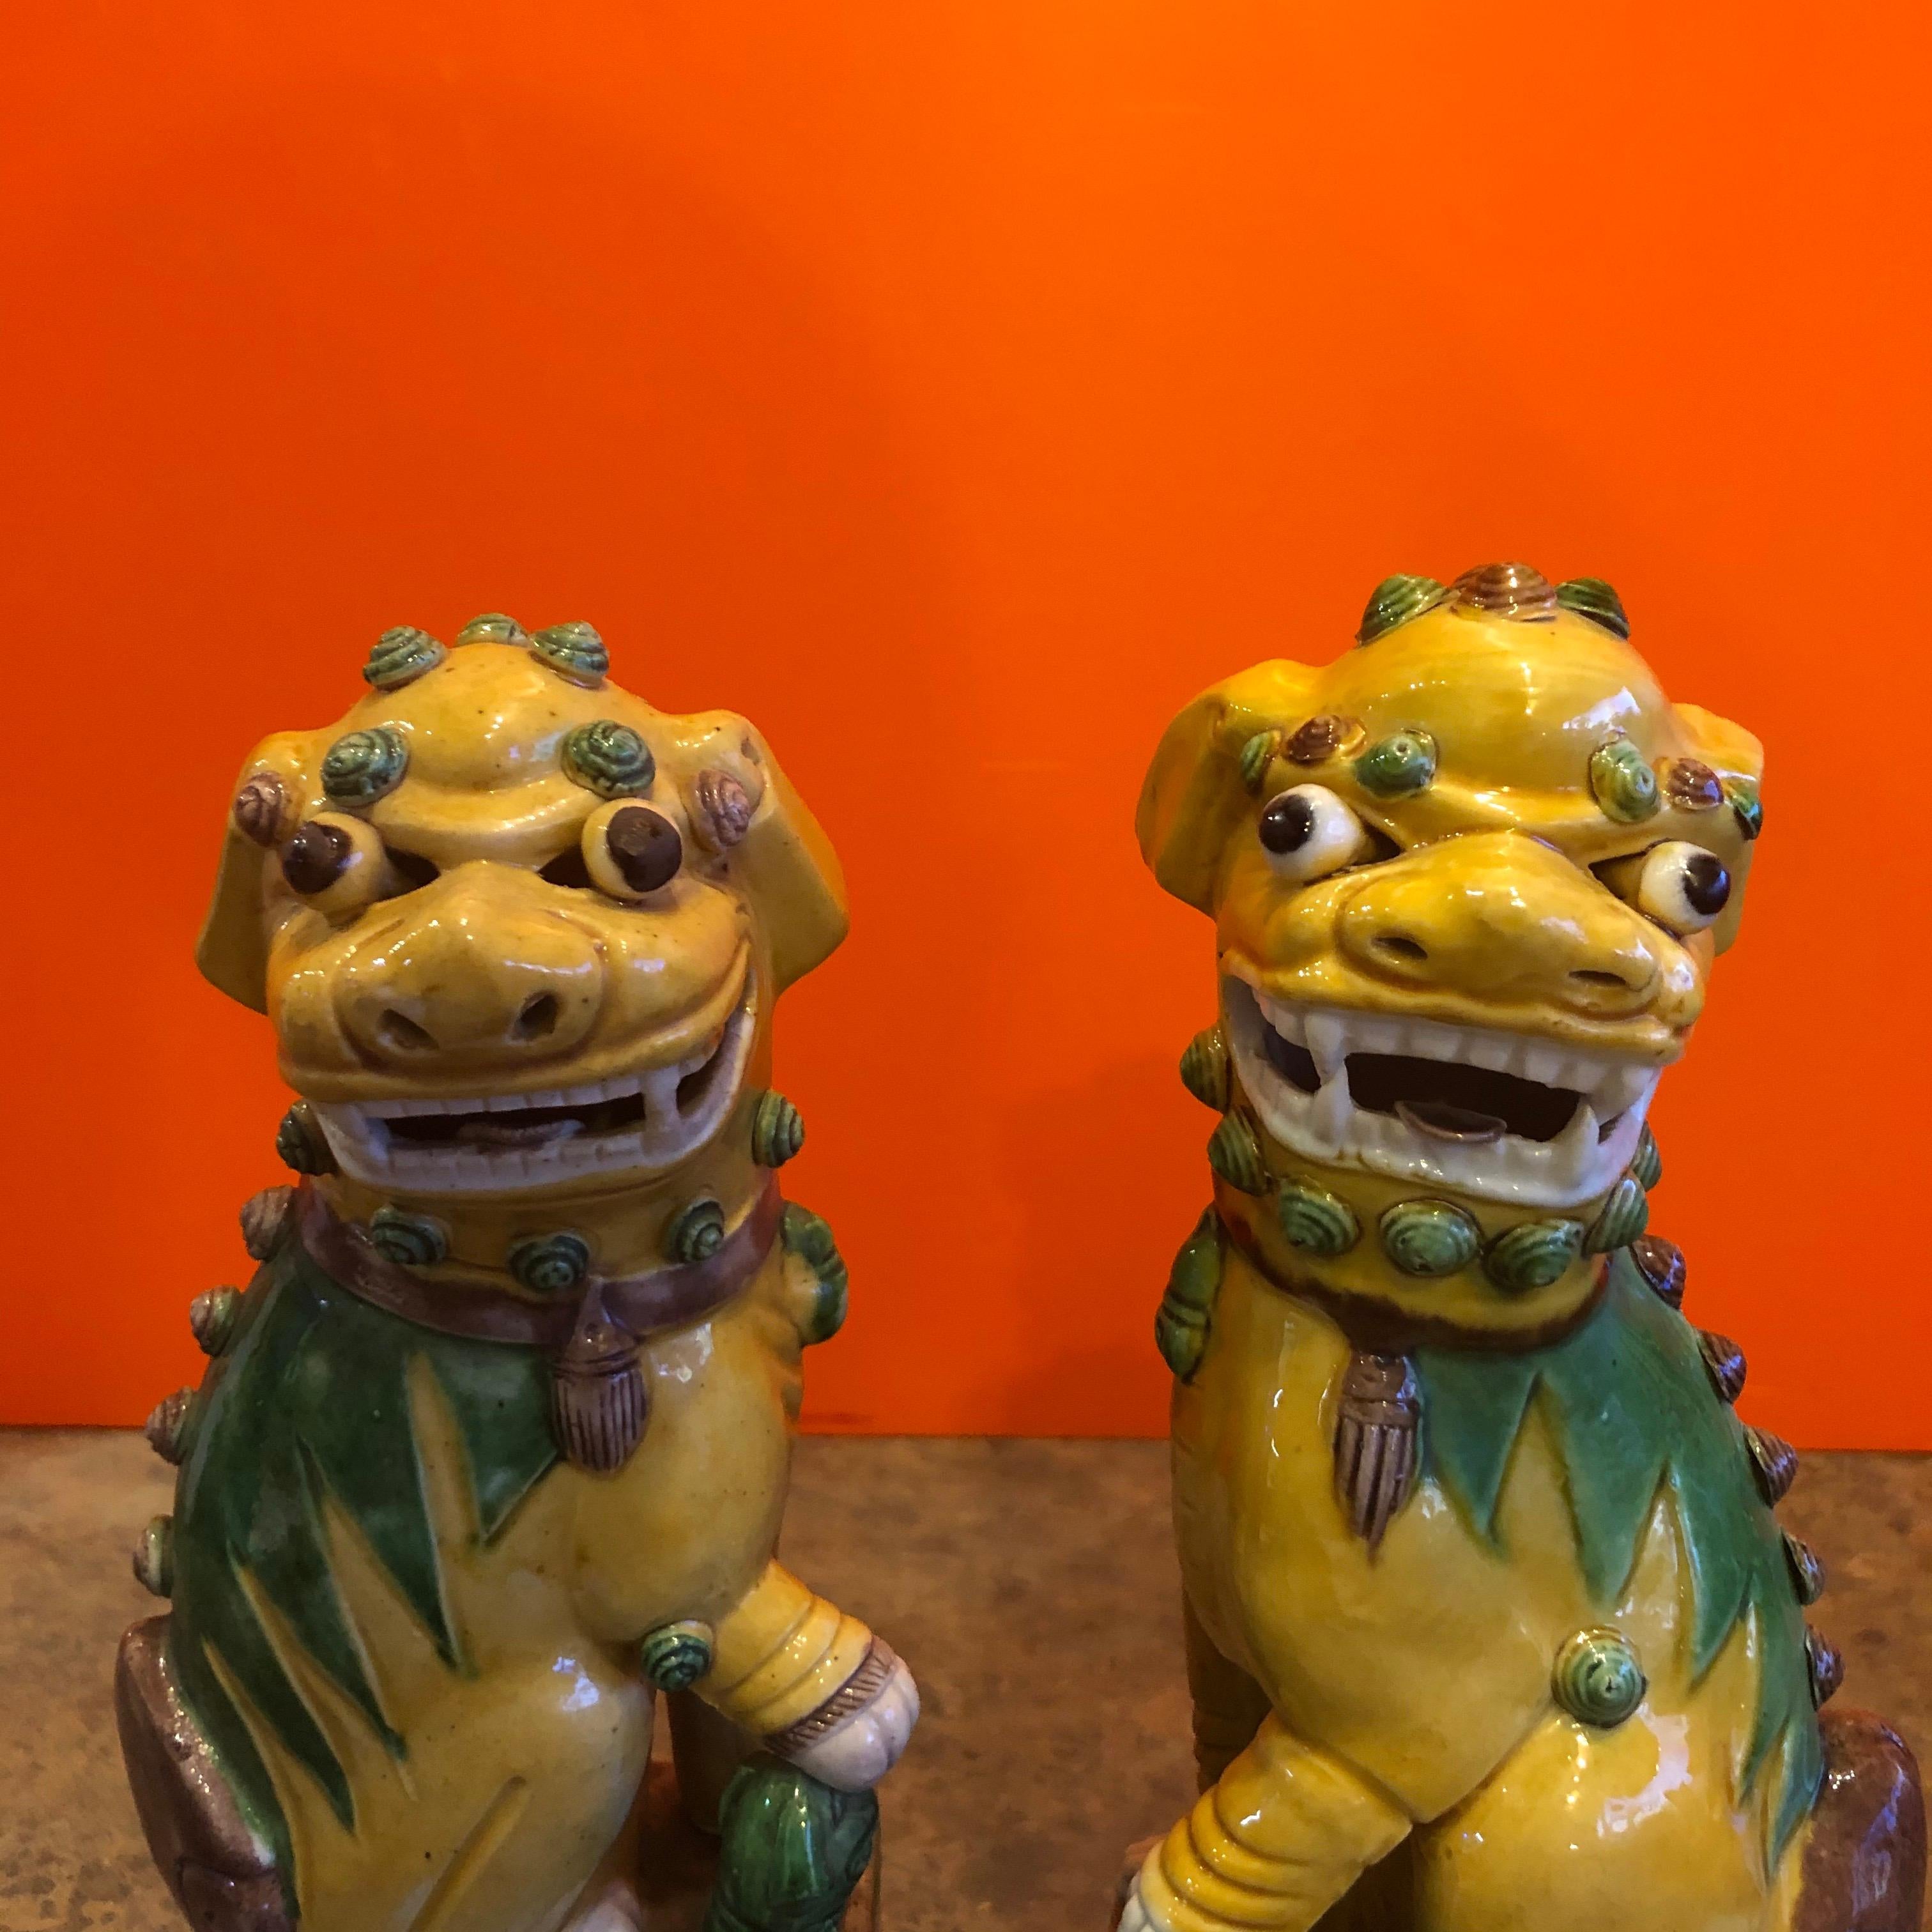 Great pair of midcentury ceramic foo dogs or bookends made in China, circa 1960s. Great detail and a beautiful color combination of yellow, green and brown; the dogs are not a perfect match and may be a married pair, but they go together great and